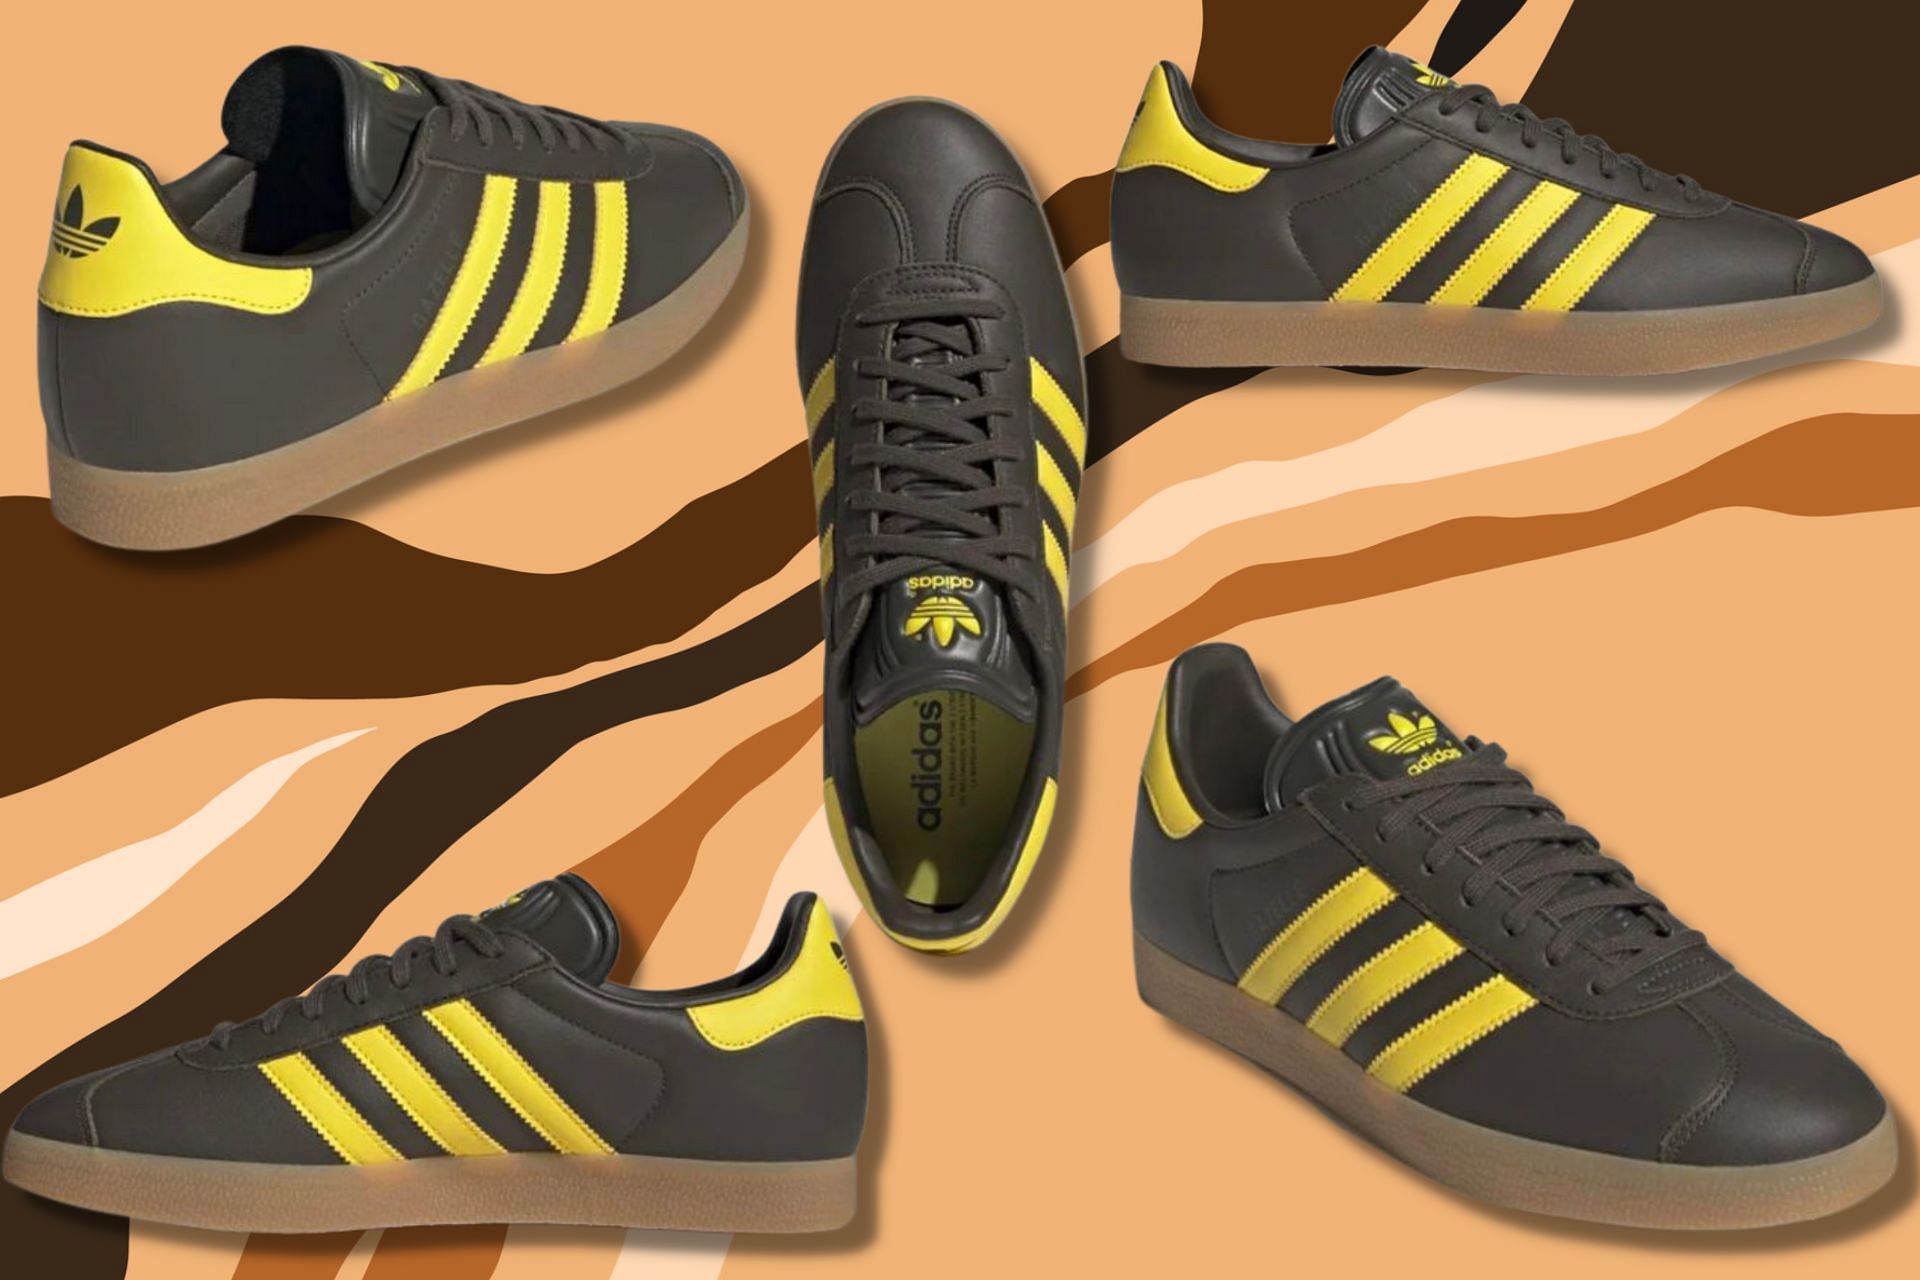 Where to buy Adidas Gazelle Shadow Olive colorway? Price, release 